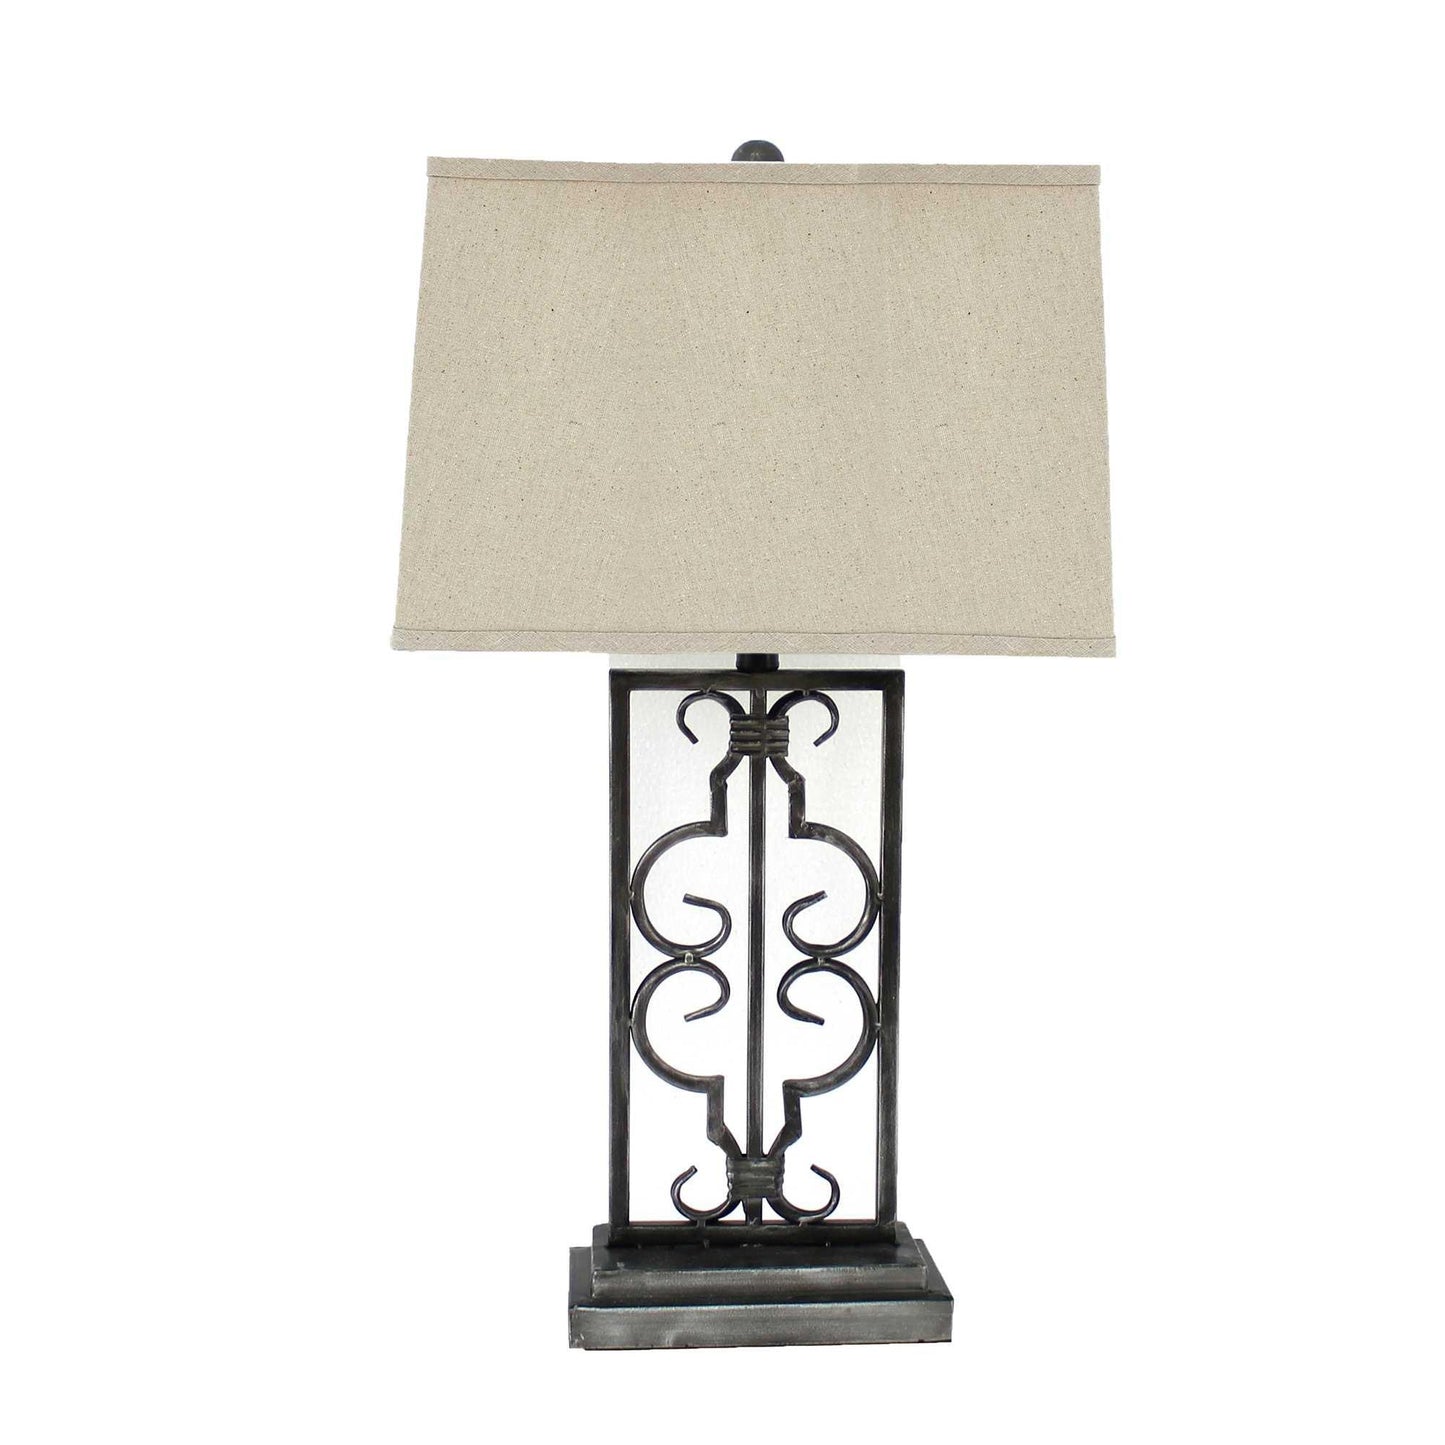 5.5 x 9.25 x 28.75 Gray Industrial With Stacked Metal Pedestal - Table Lamp - AFS